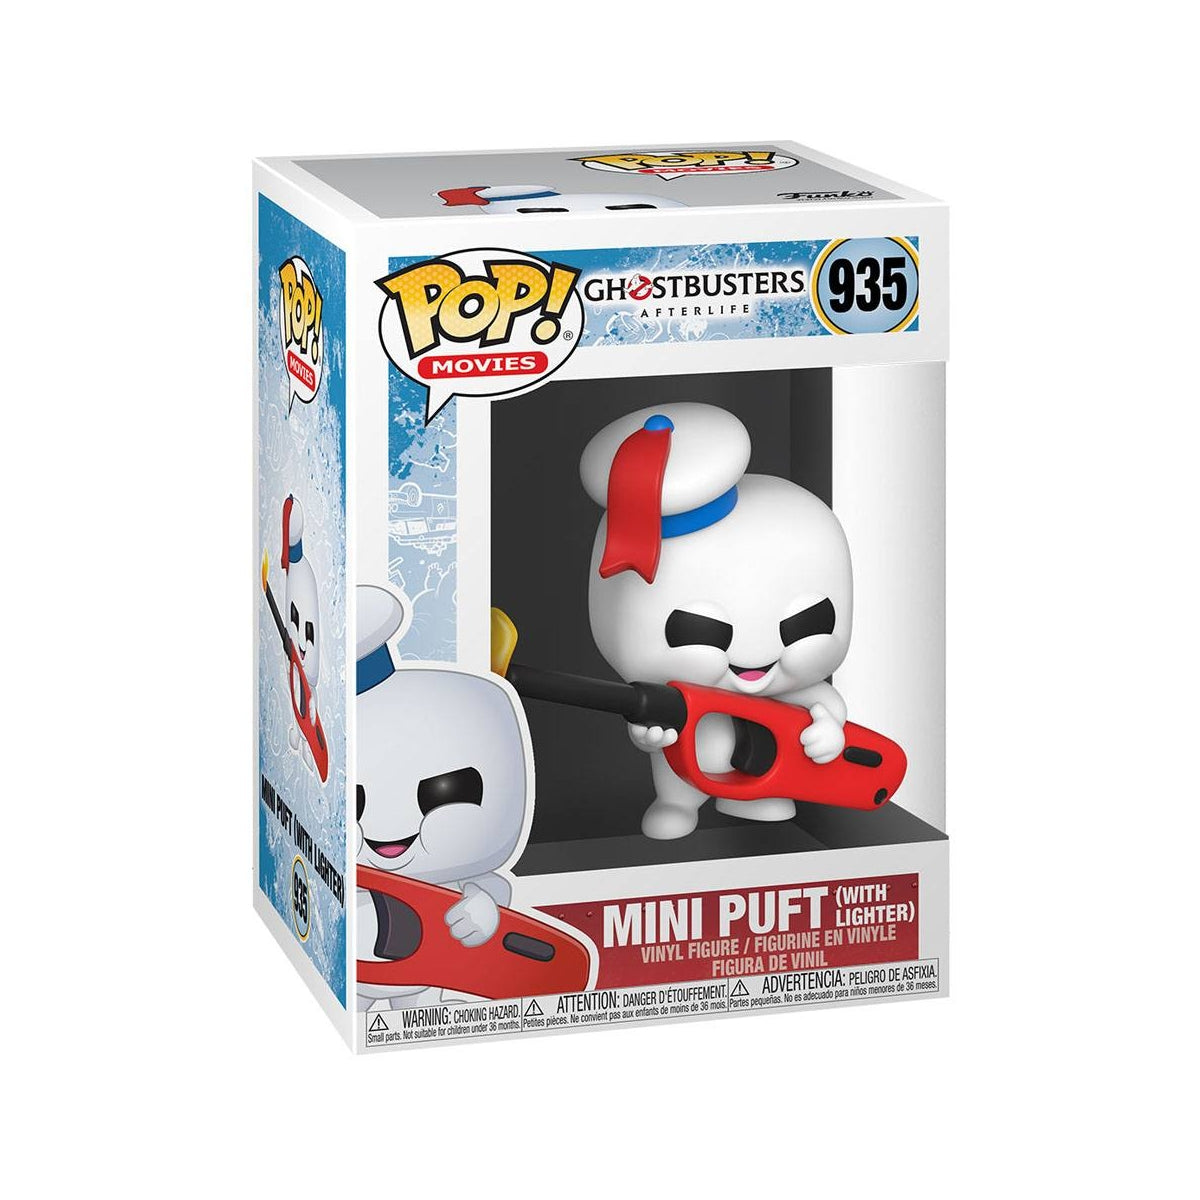 Mini Puft with lighter